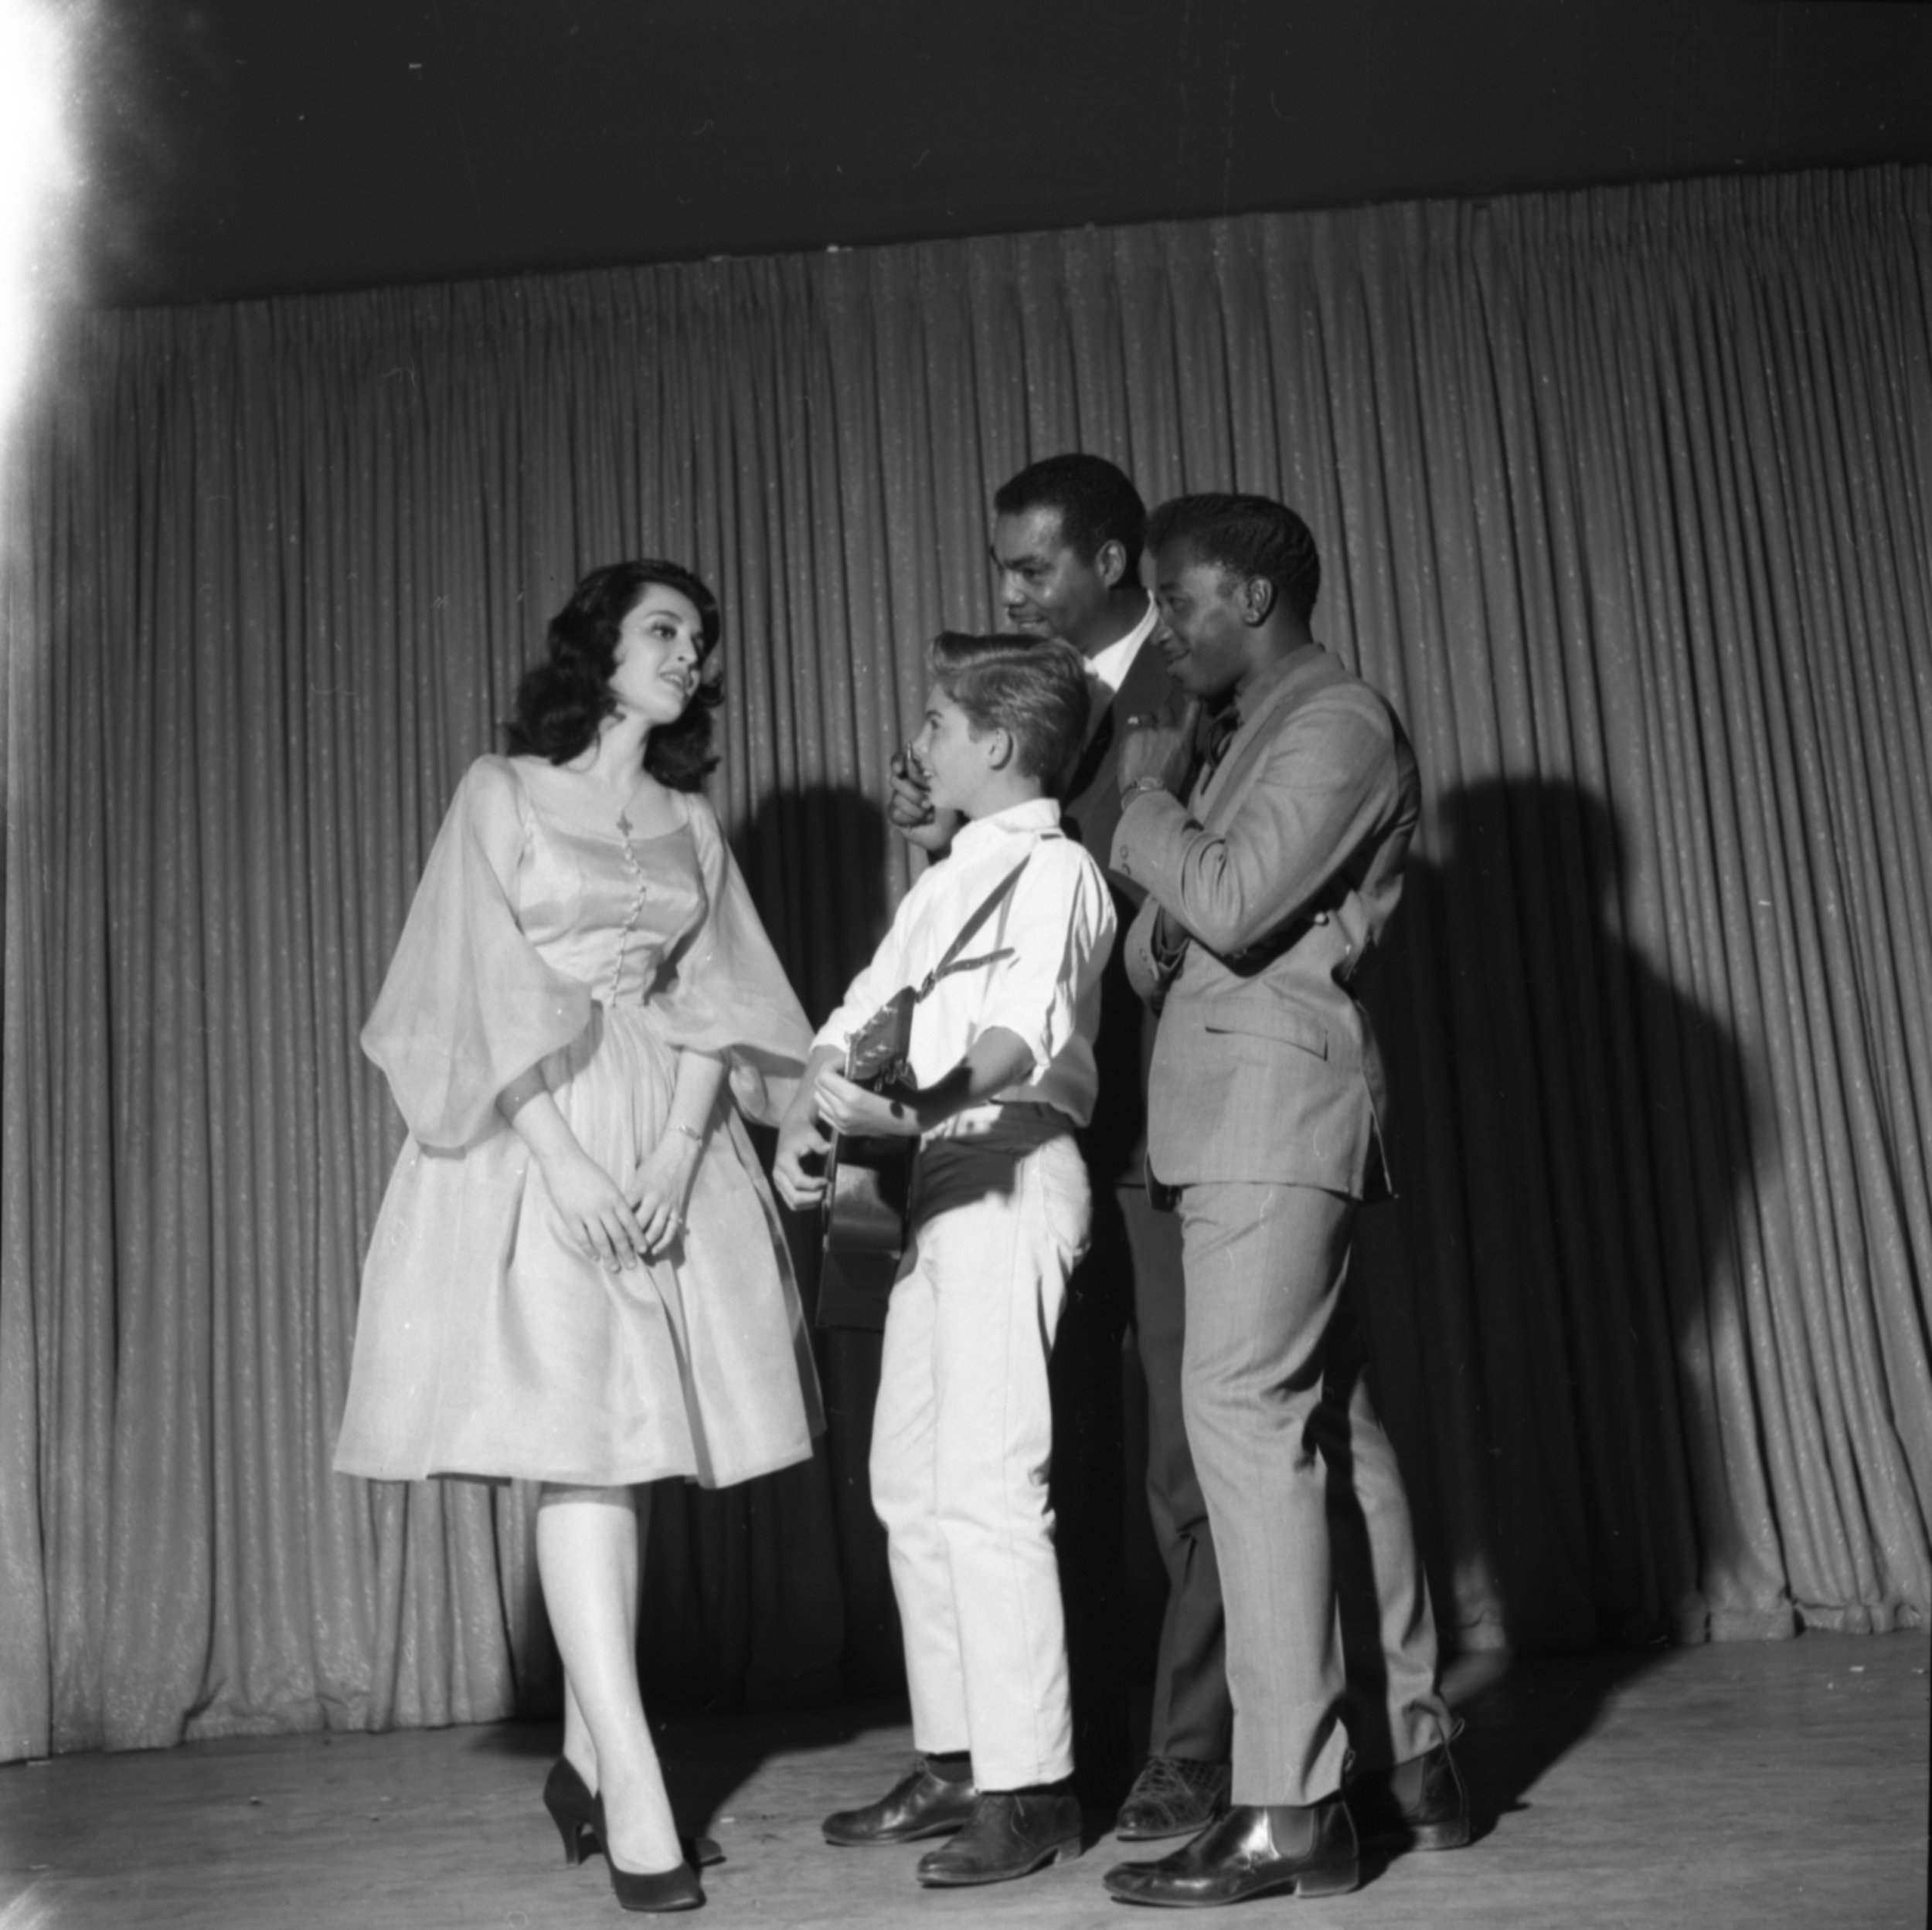 Carver House Talent Contest, May 9, 1962, Image 02